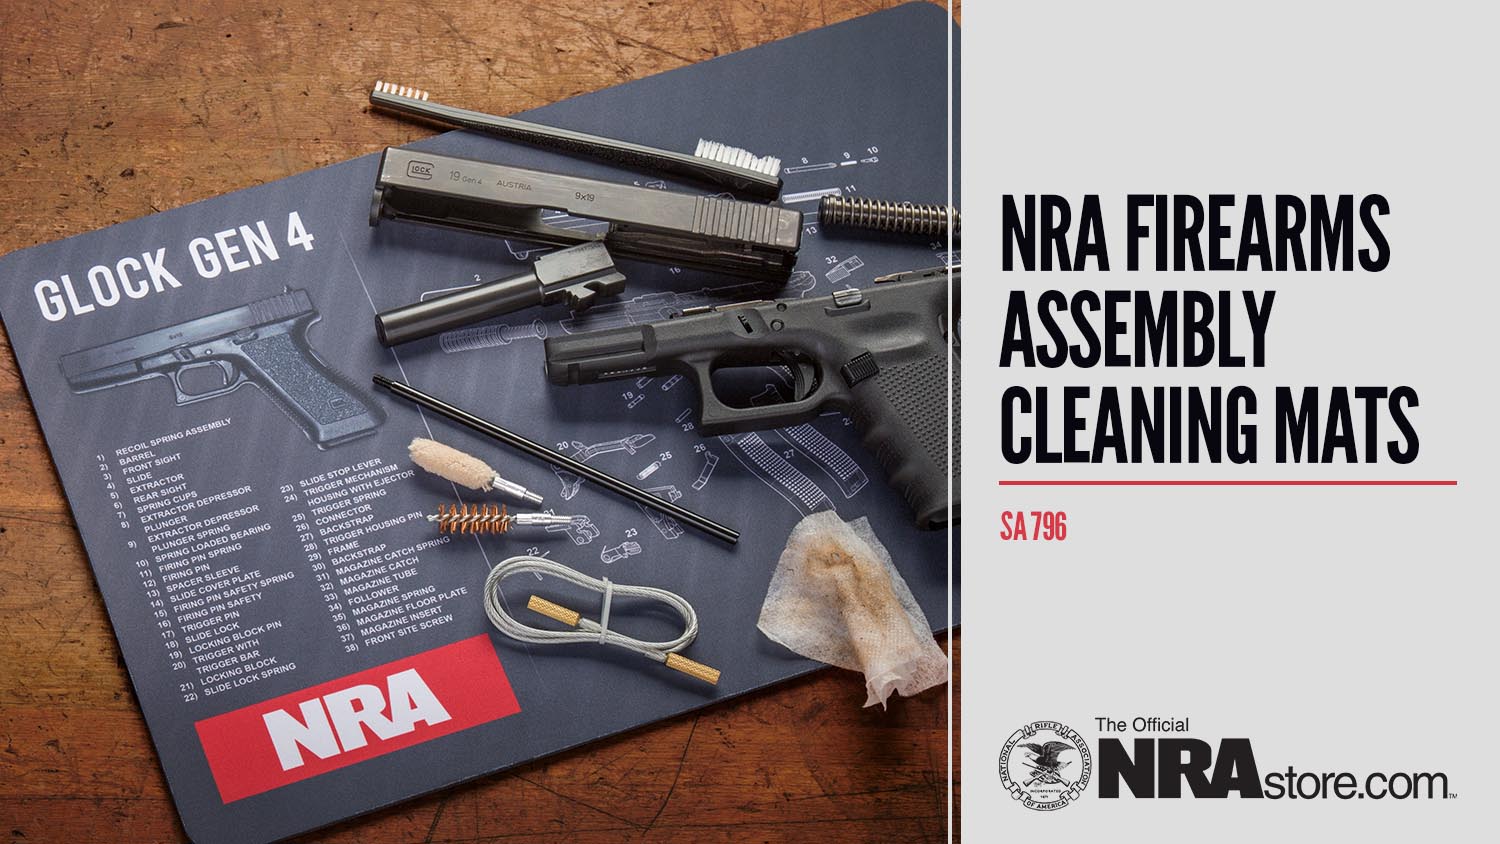 NRAstore Product Highlight: NRA Firearms Assembly Cleaning Mats